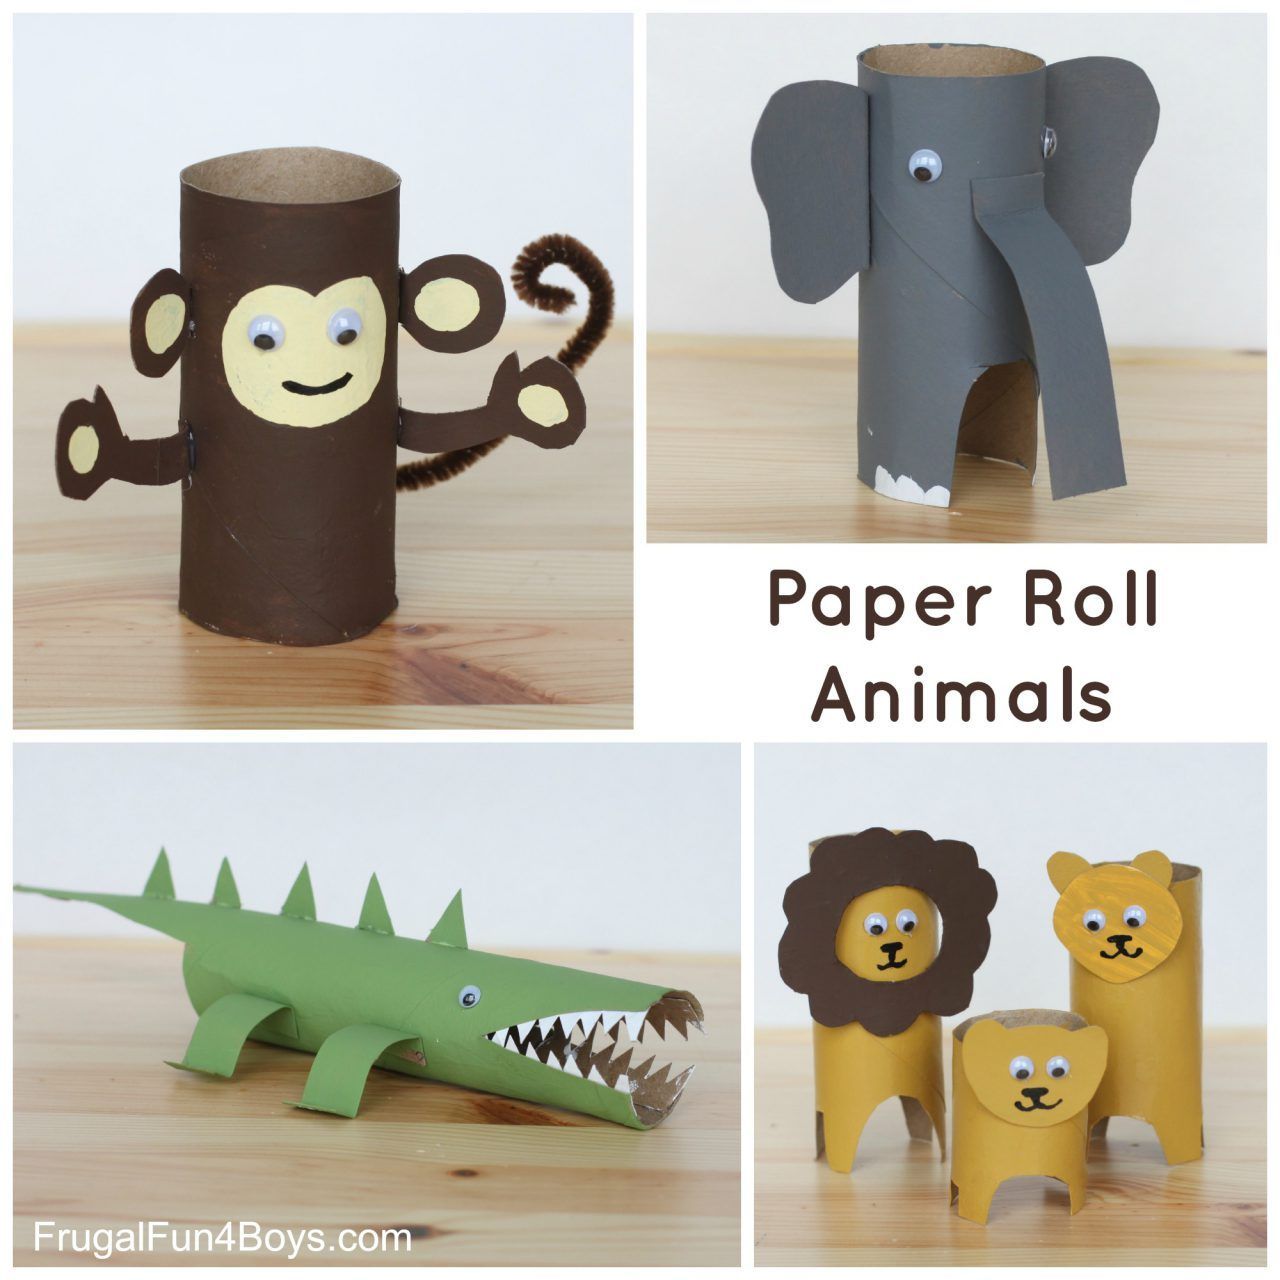 Paper Roll Animals - Frugal Fun For Boys and Girls -   19 diy Paper animals ideas